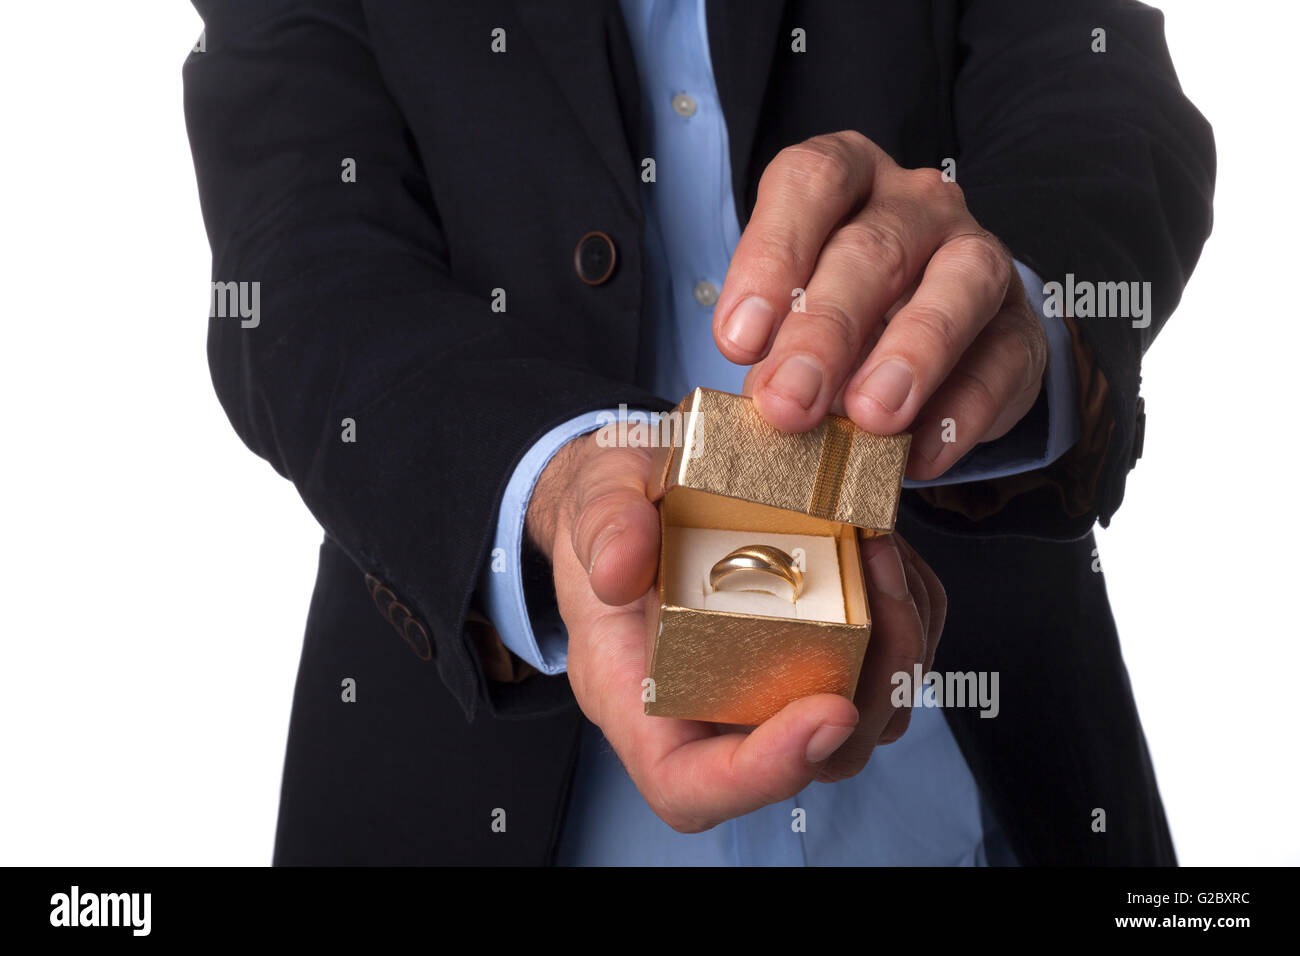 Man Hand in Suit Holding Golden Jewelry Box Isolated on White Background Stock Photo